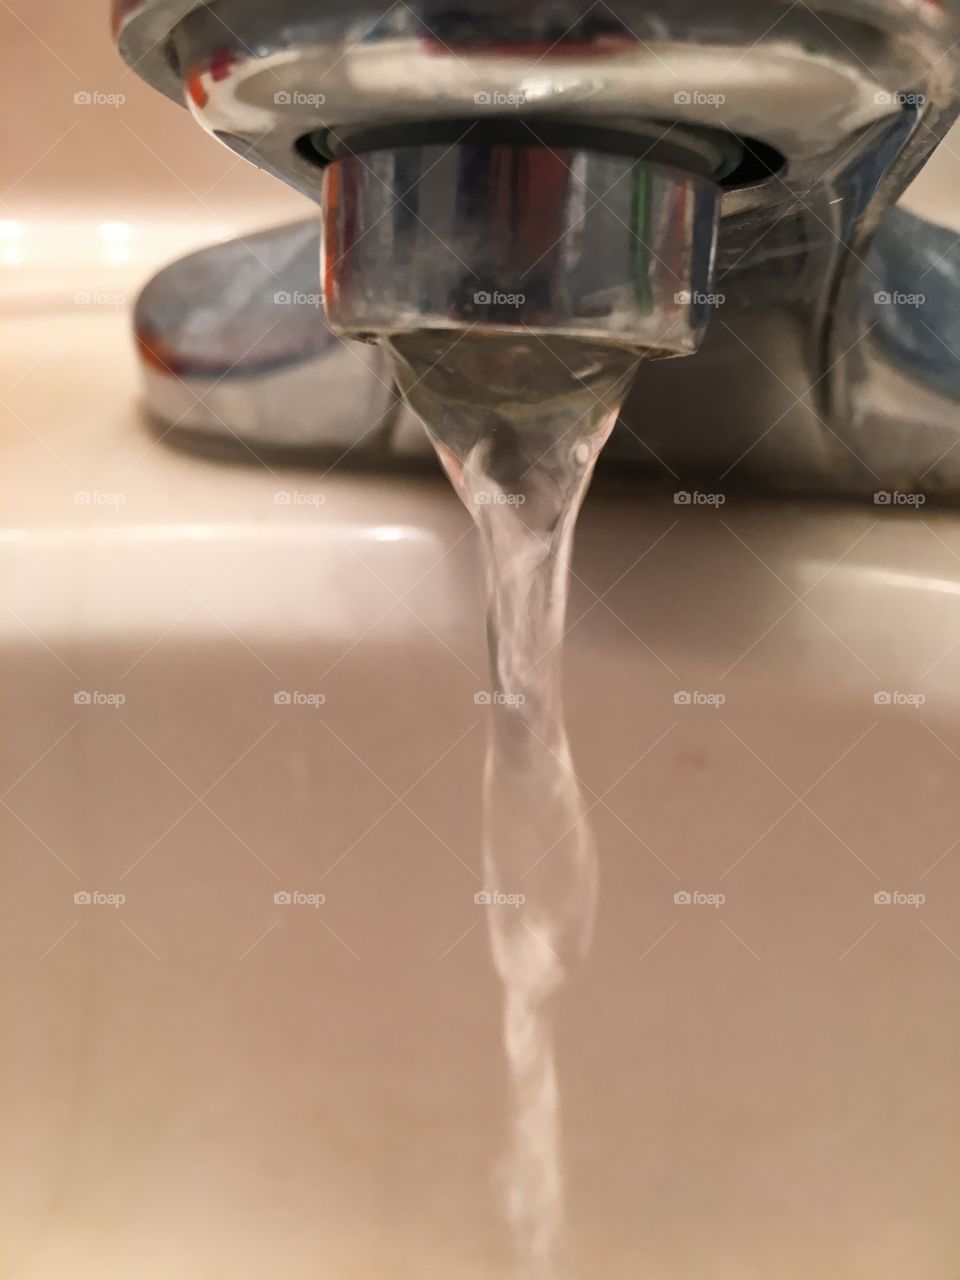 Clear running water from bathroom faucet 